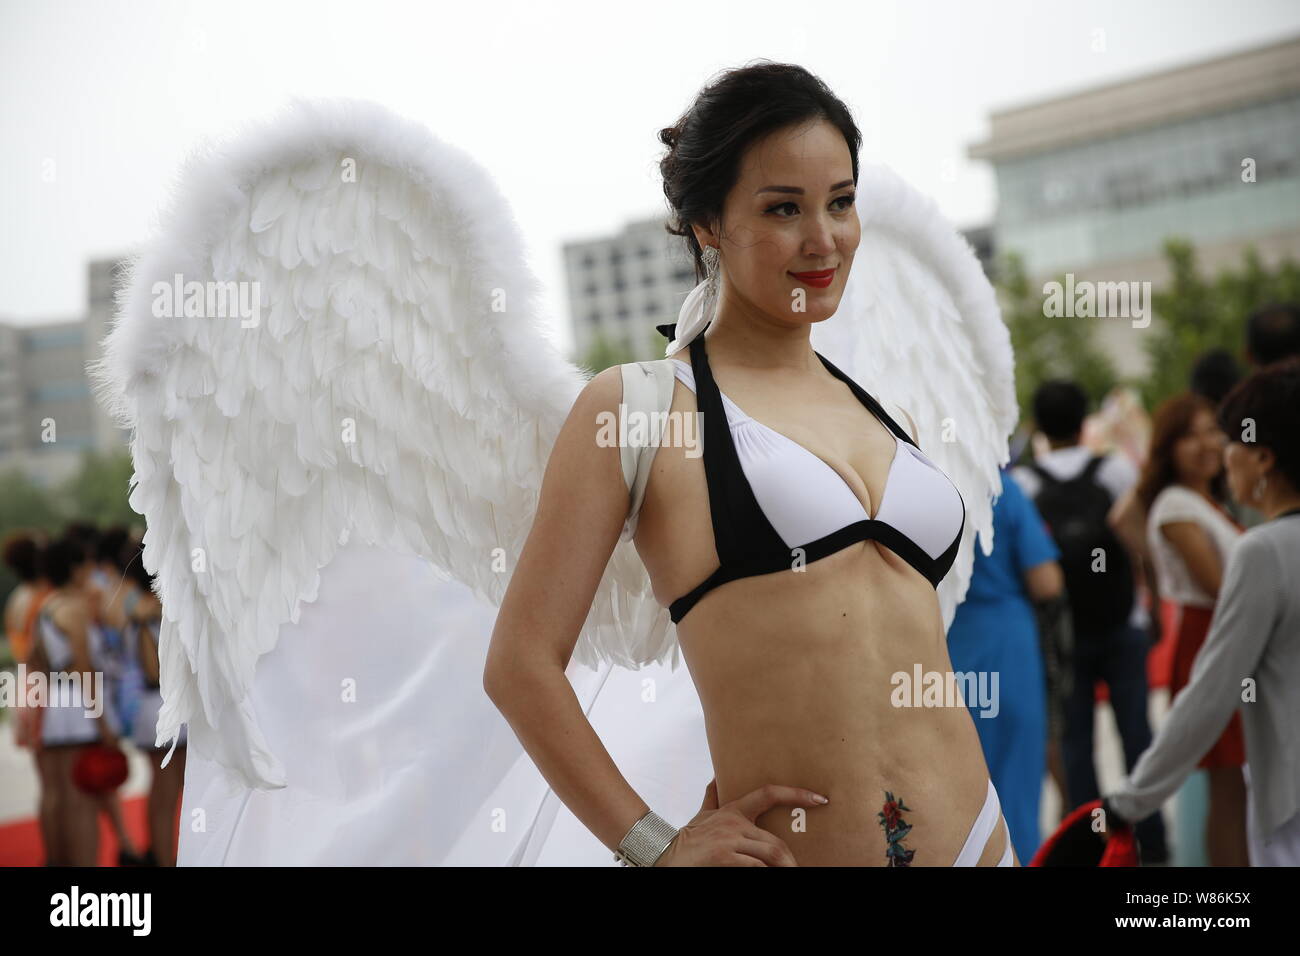 A middle-aged Chinese woman dressed in bikini poses during a middle-aged  and elderly bikini contest in Tianjin, China, 23 July 2016. Over the weeken  Stock Photo - Alamy